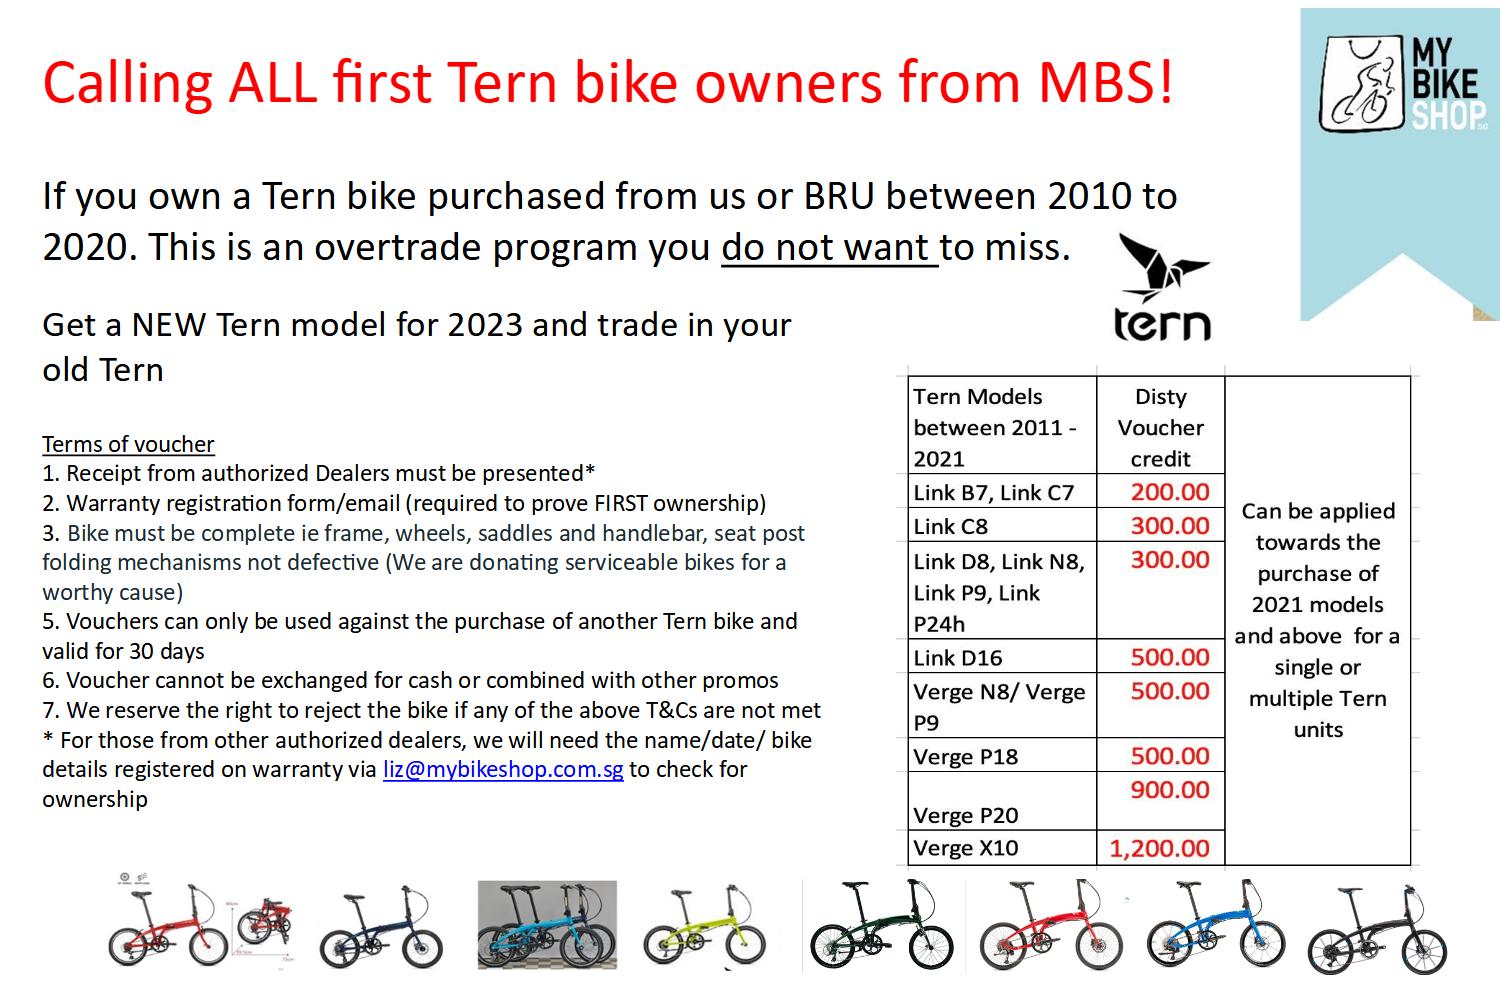 Recognising our customers who have bought from us - high trade in to let you upgrade your bike